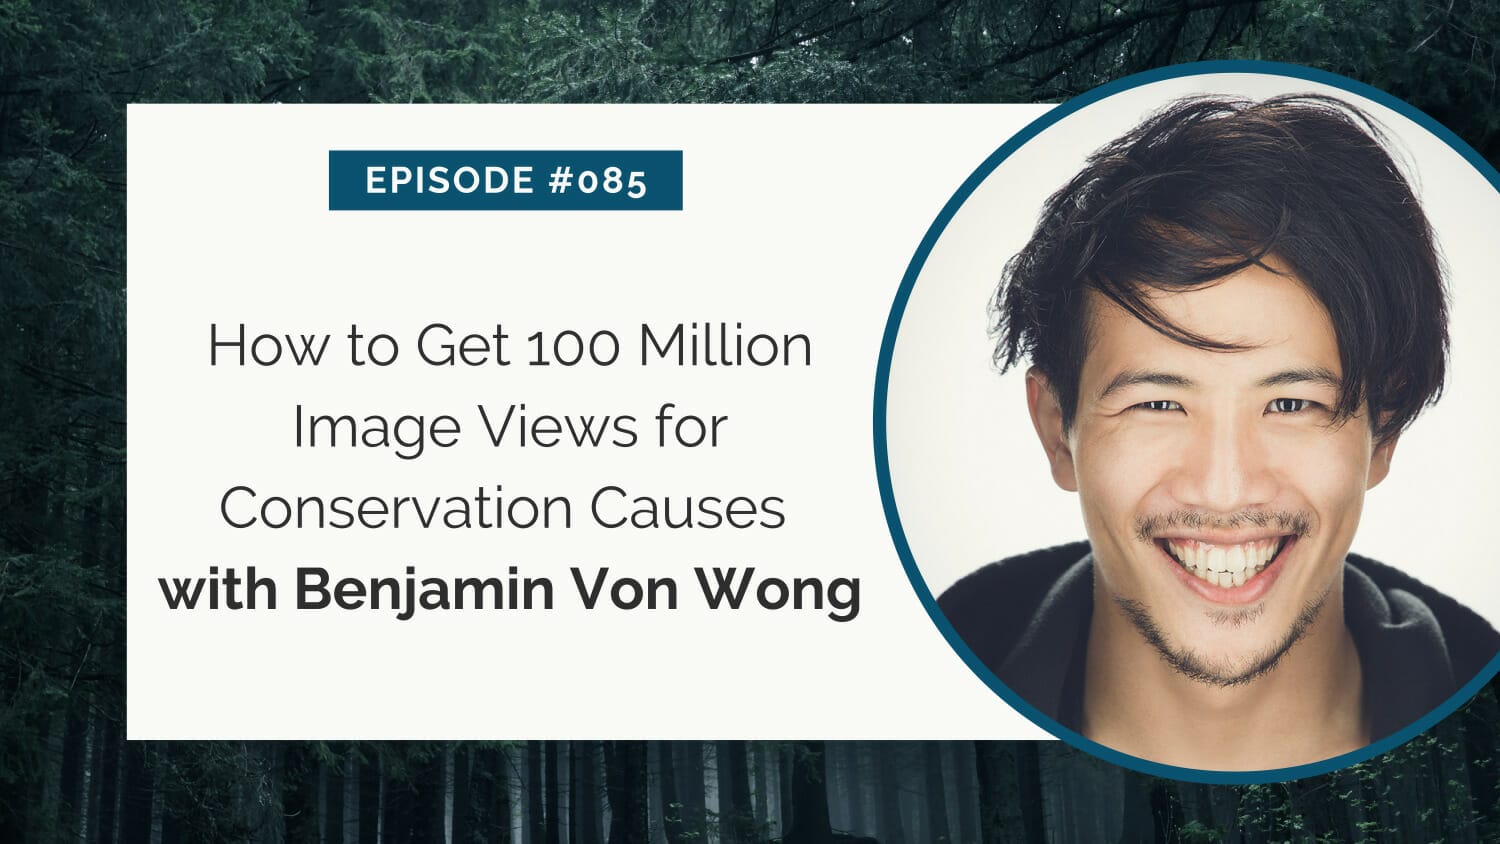 Podcast episode graphic featuring benjamin von wong discussing strategies for achieving 100 million image views for conservation efforts.